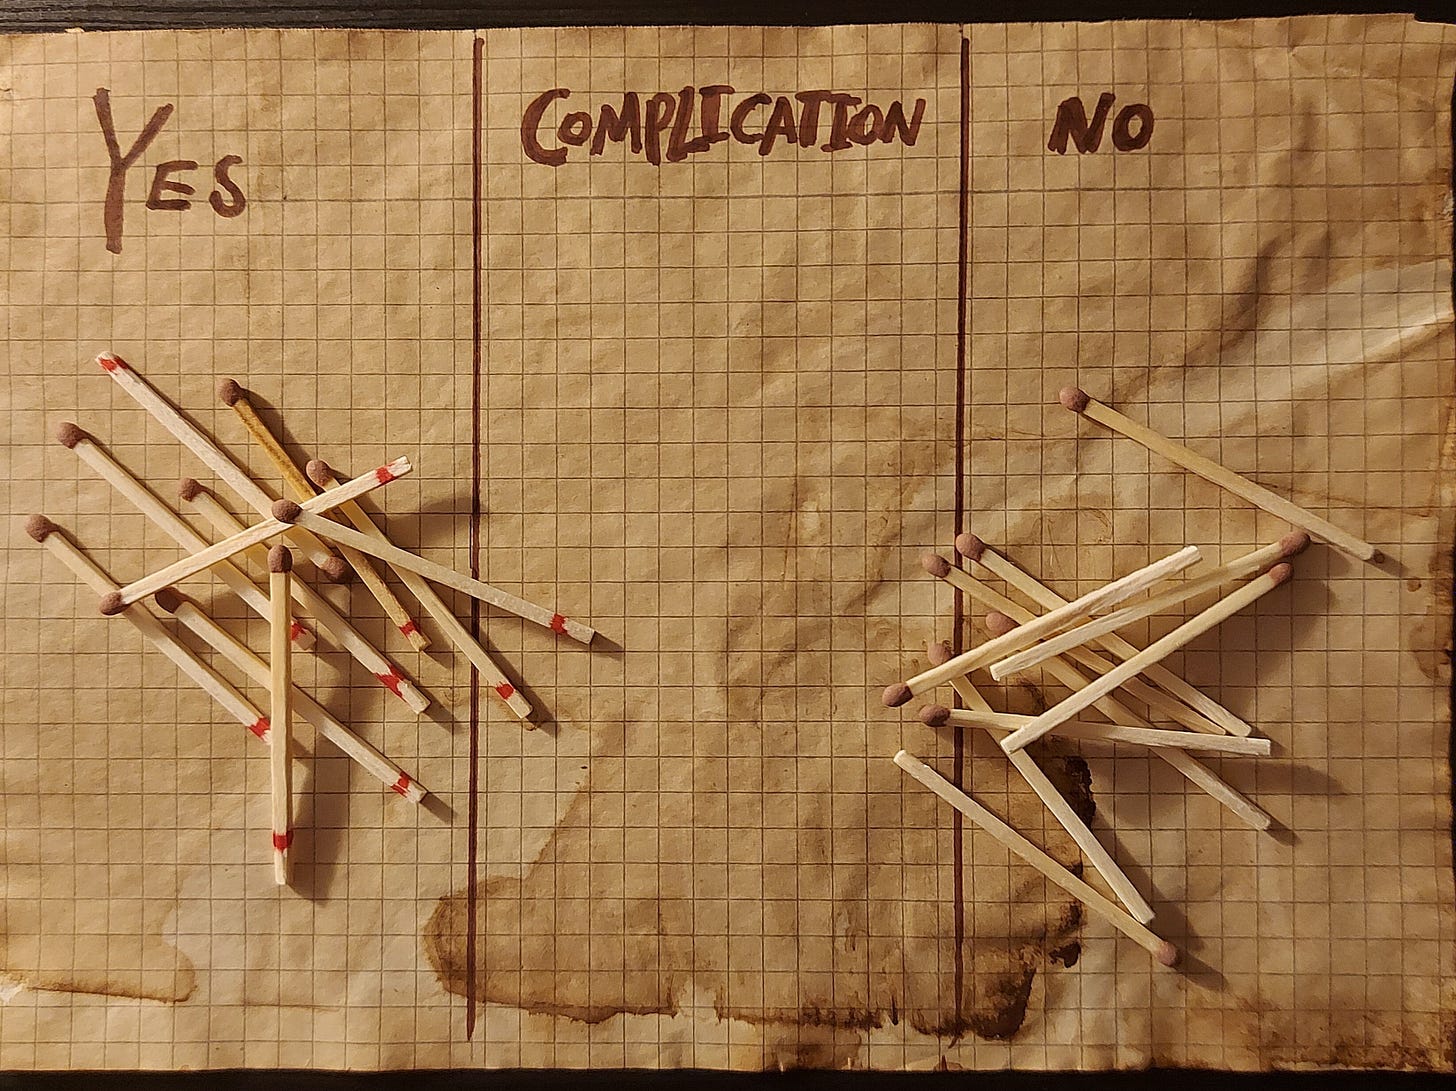 Paper divided into "YES", "COMPLICATION", and "NO" sections evenly. Twenty matches sit atop it, ten at each end.